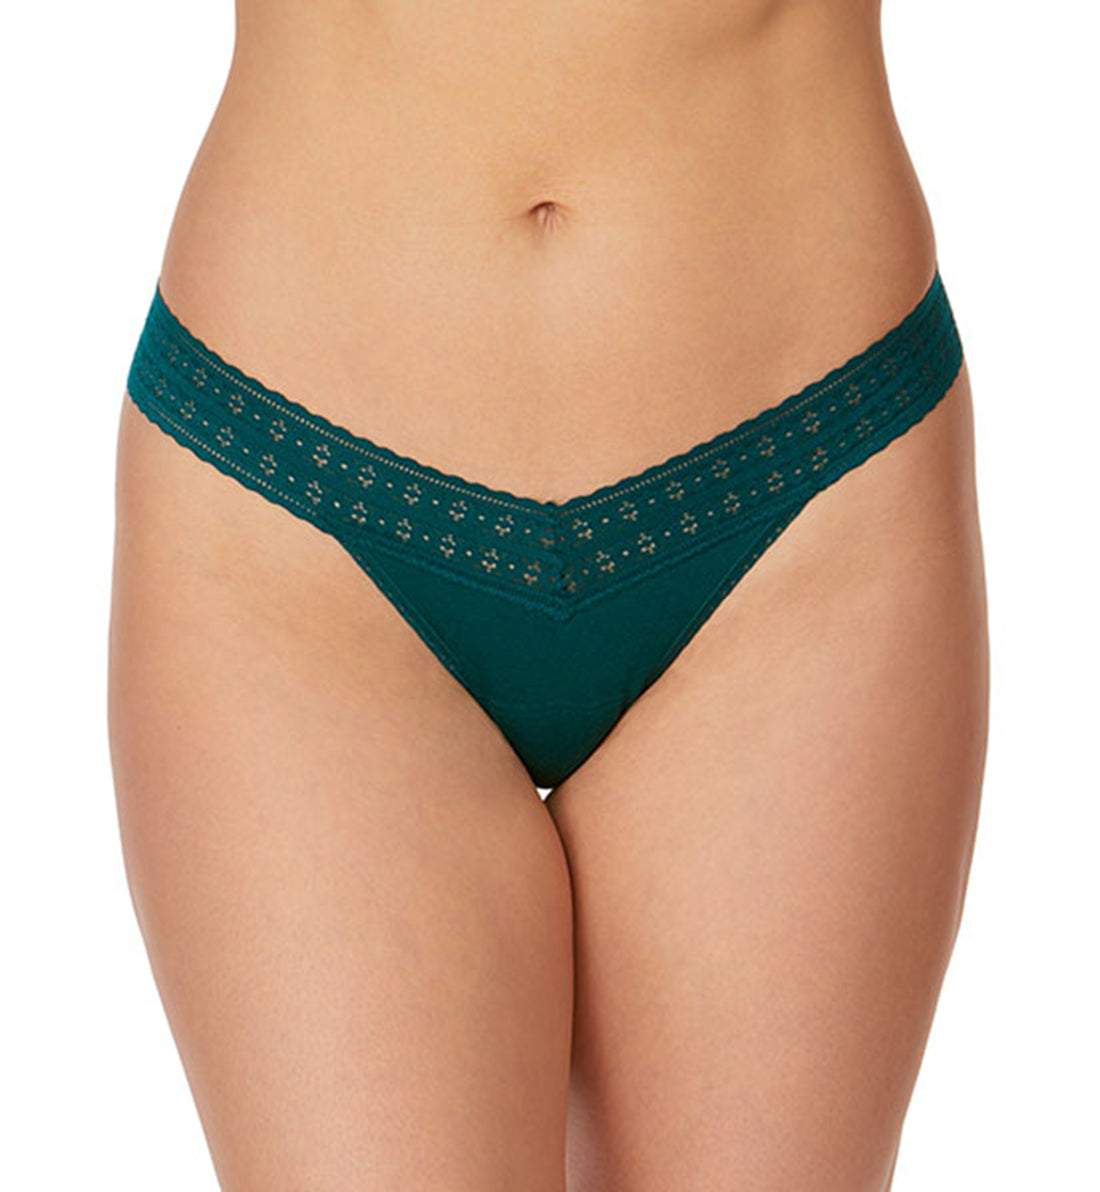 Hanky Panky DreamEase Low Rise Thong (631004),Ivy - Ivy,One Size